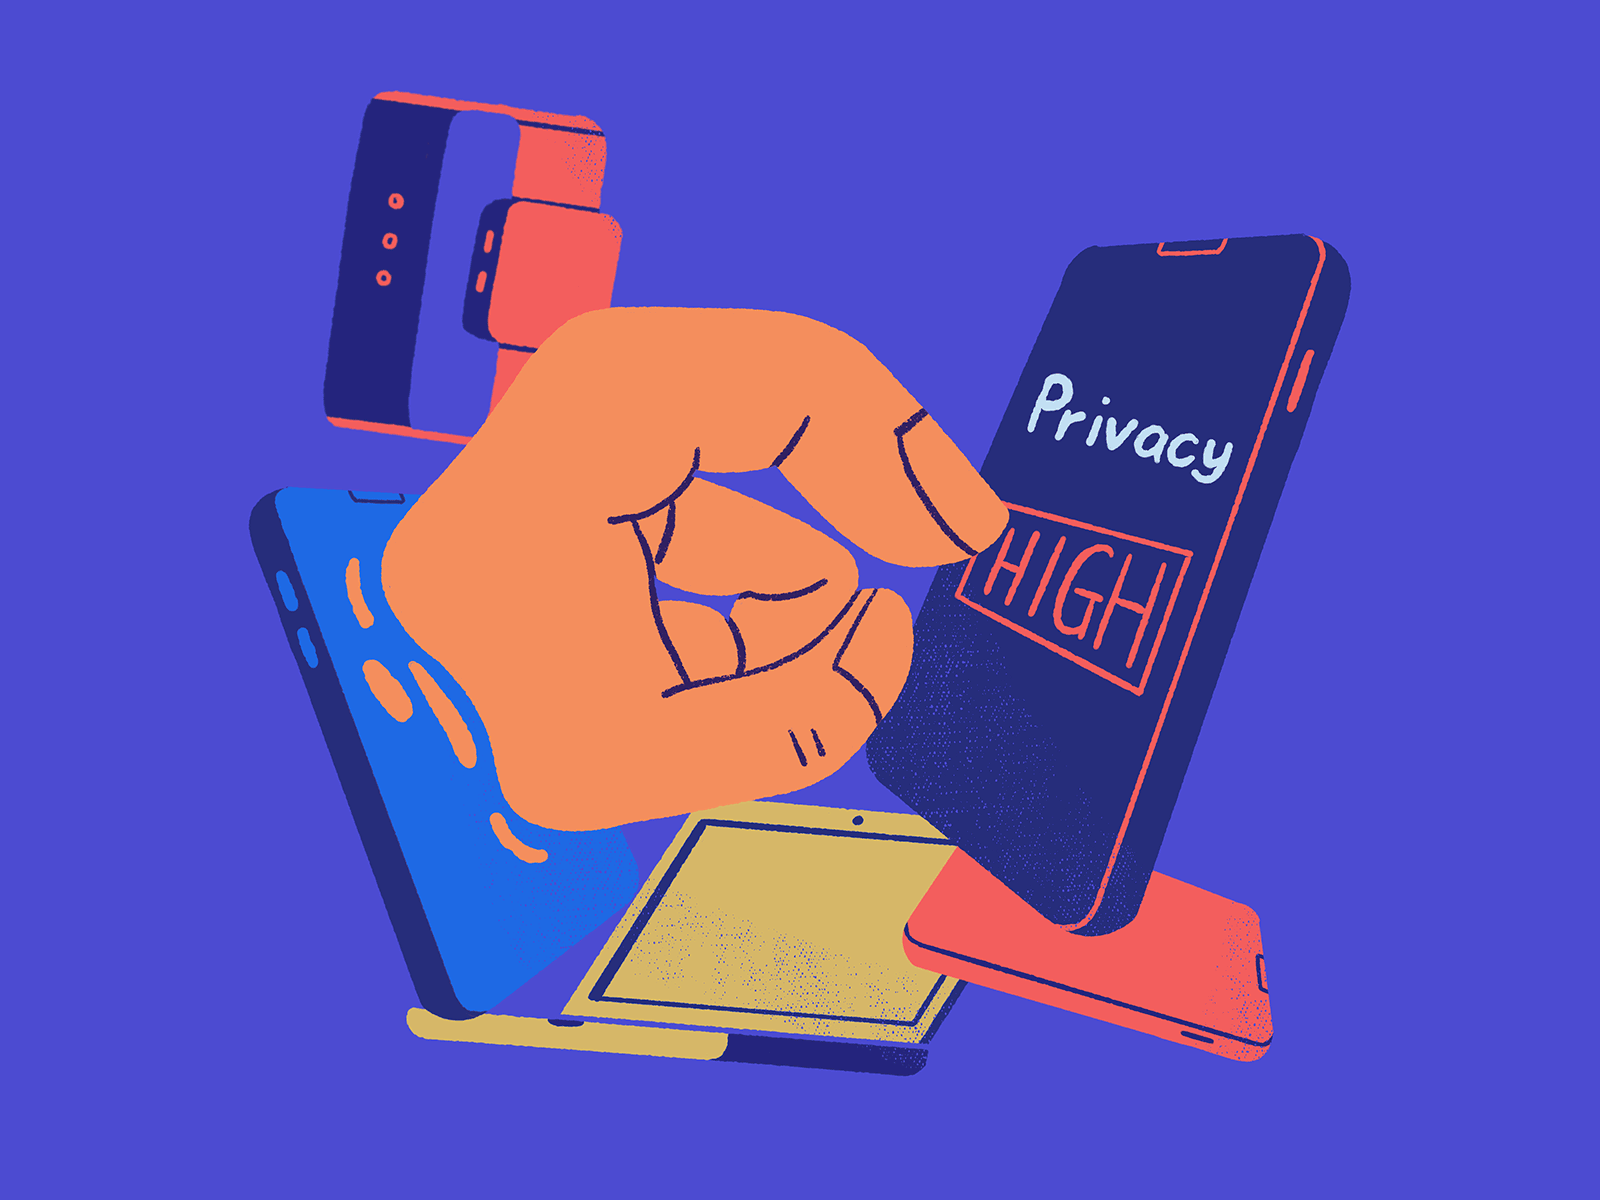 Data Privacy Day by Somewan on Dribbble